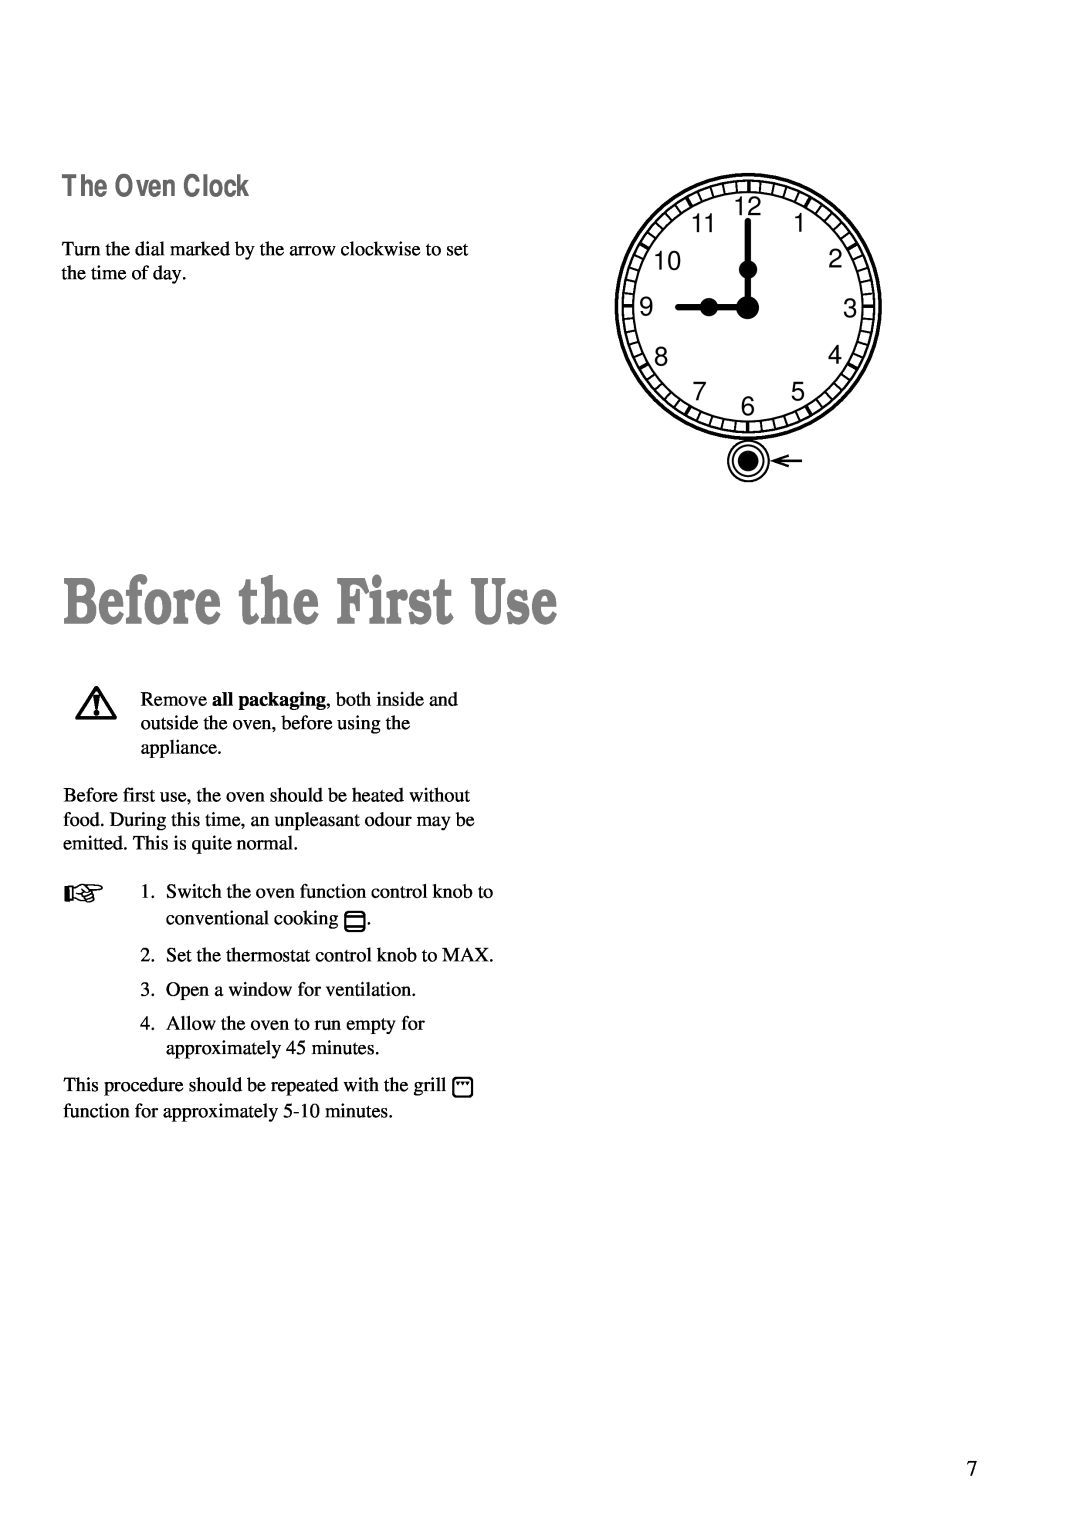 Zanussi ZBC 748 installation manual Before the First Use, The Oven Clock 